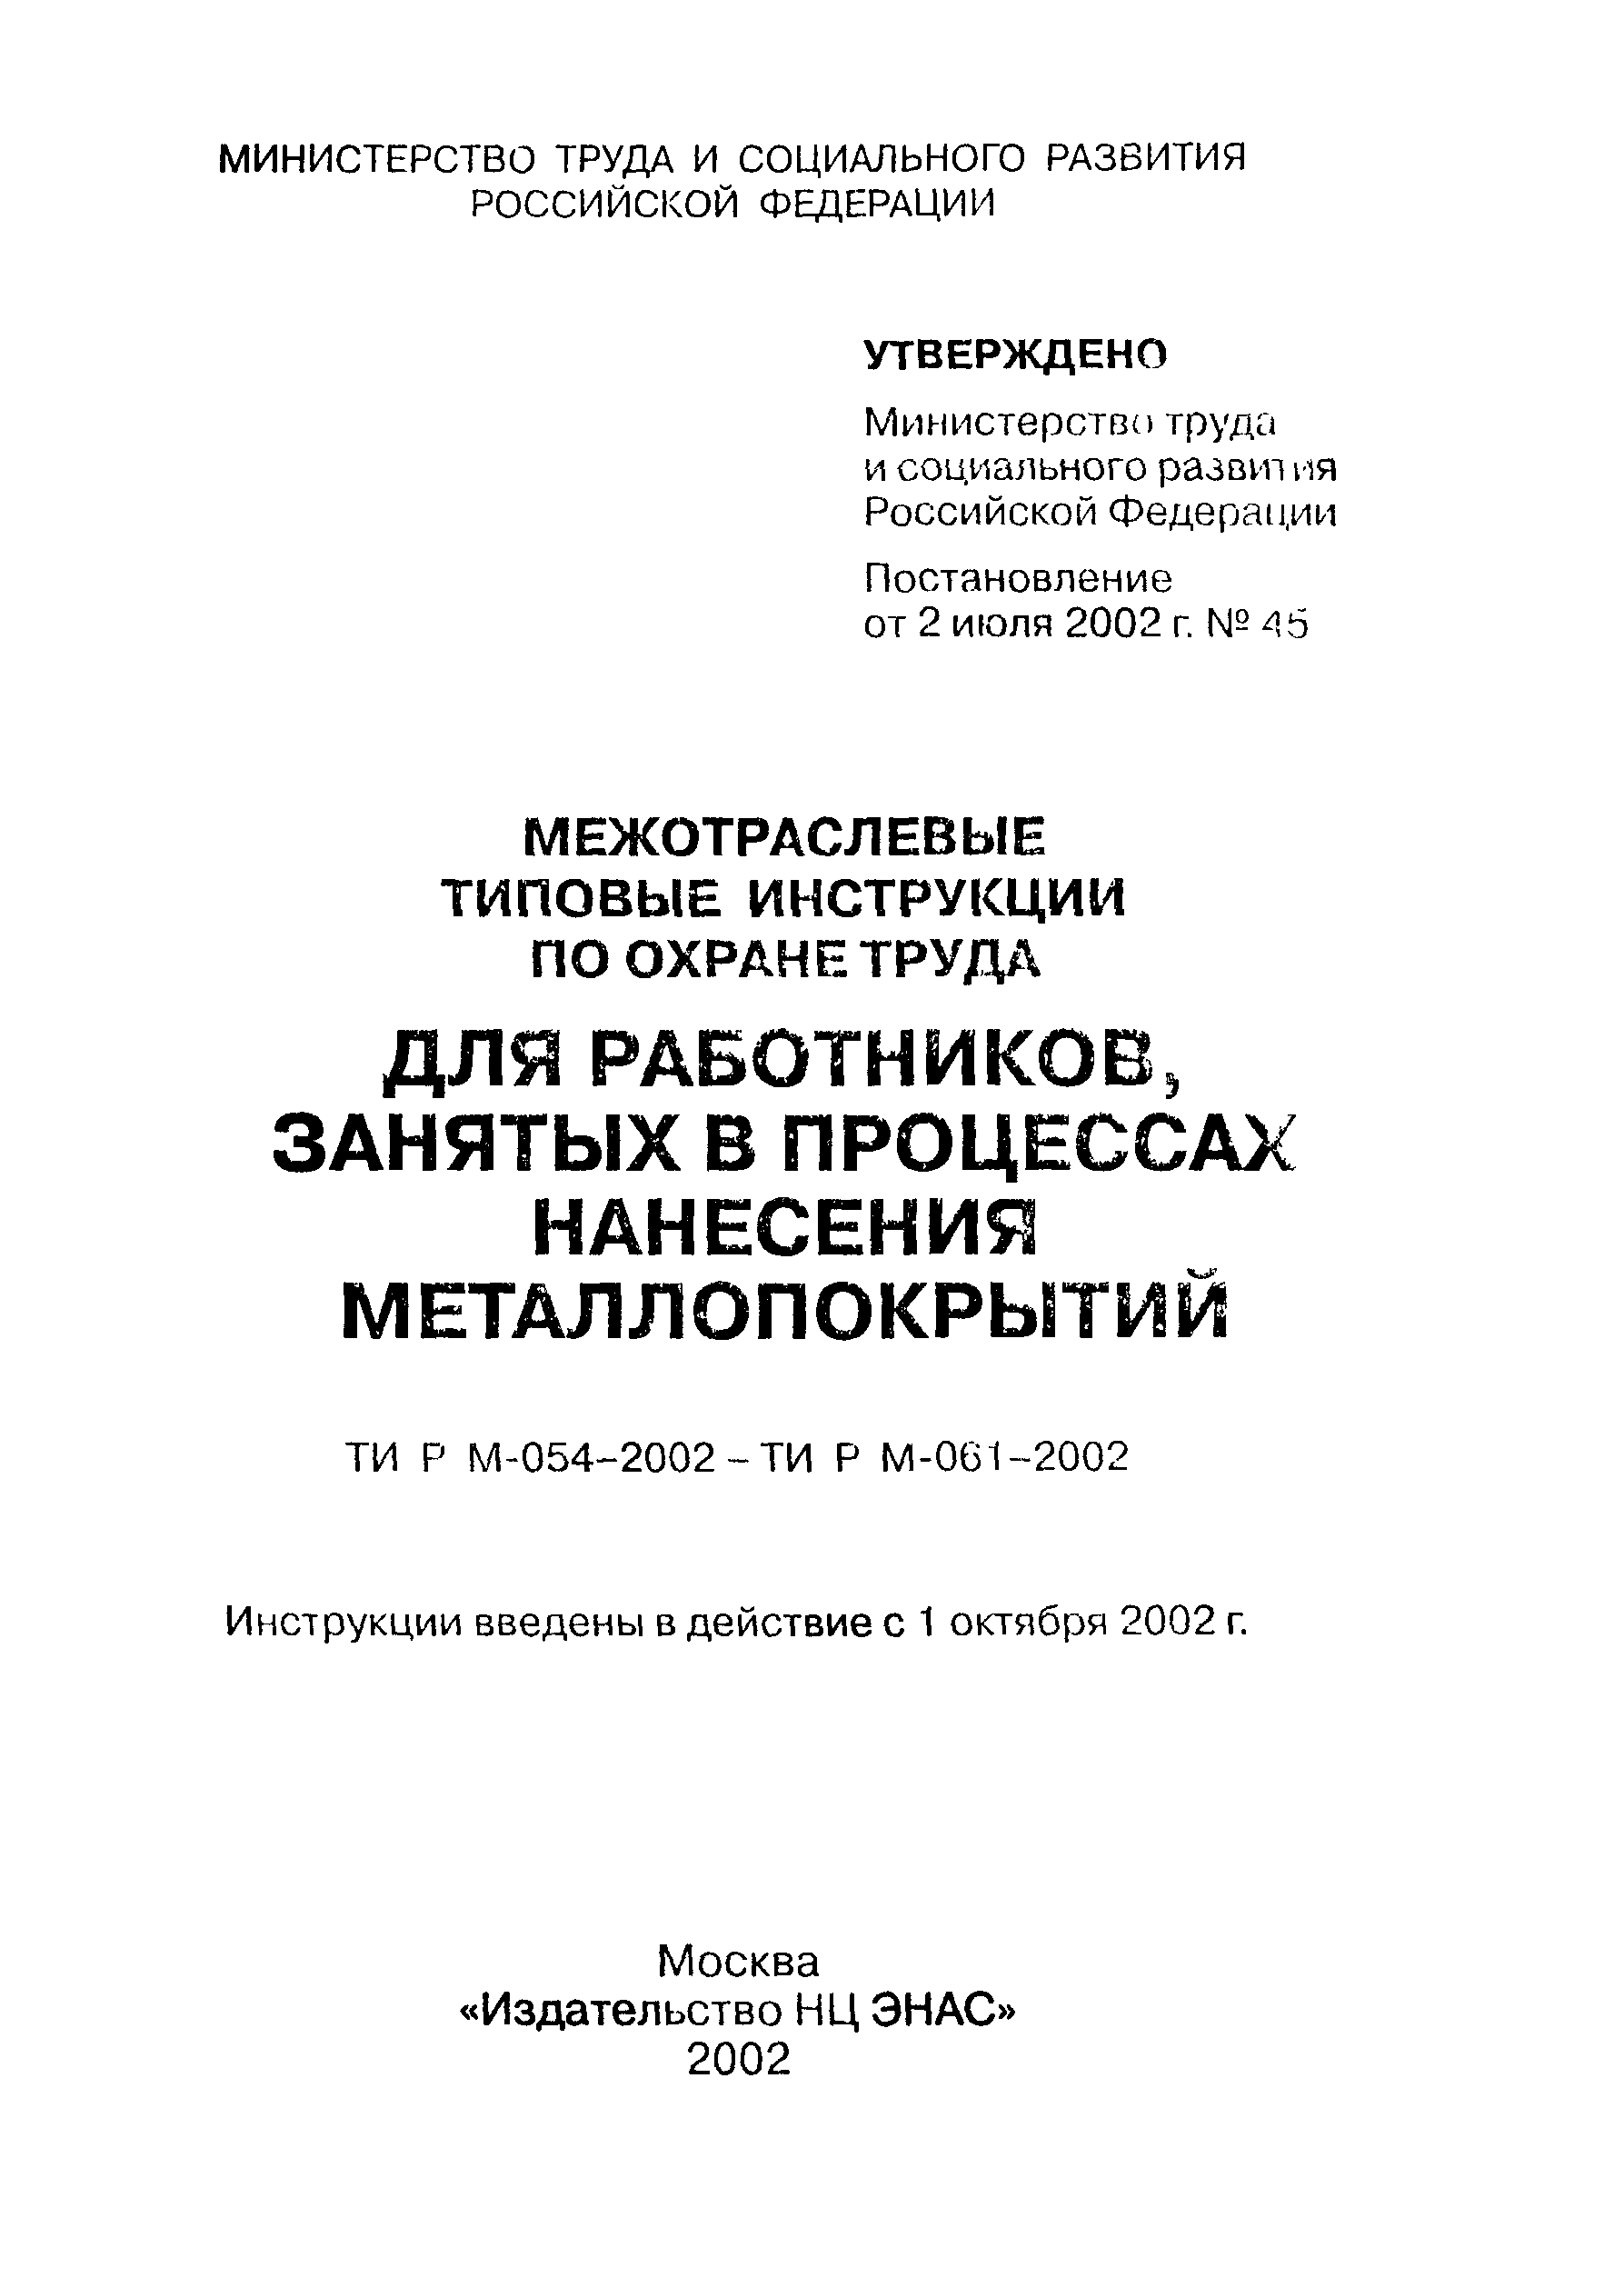 ТИ Р М-060-2002